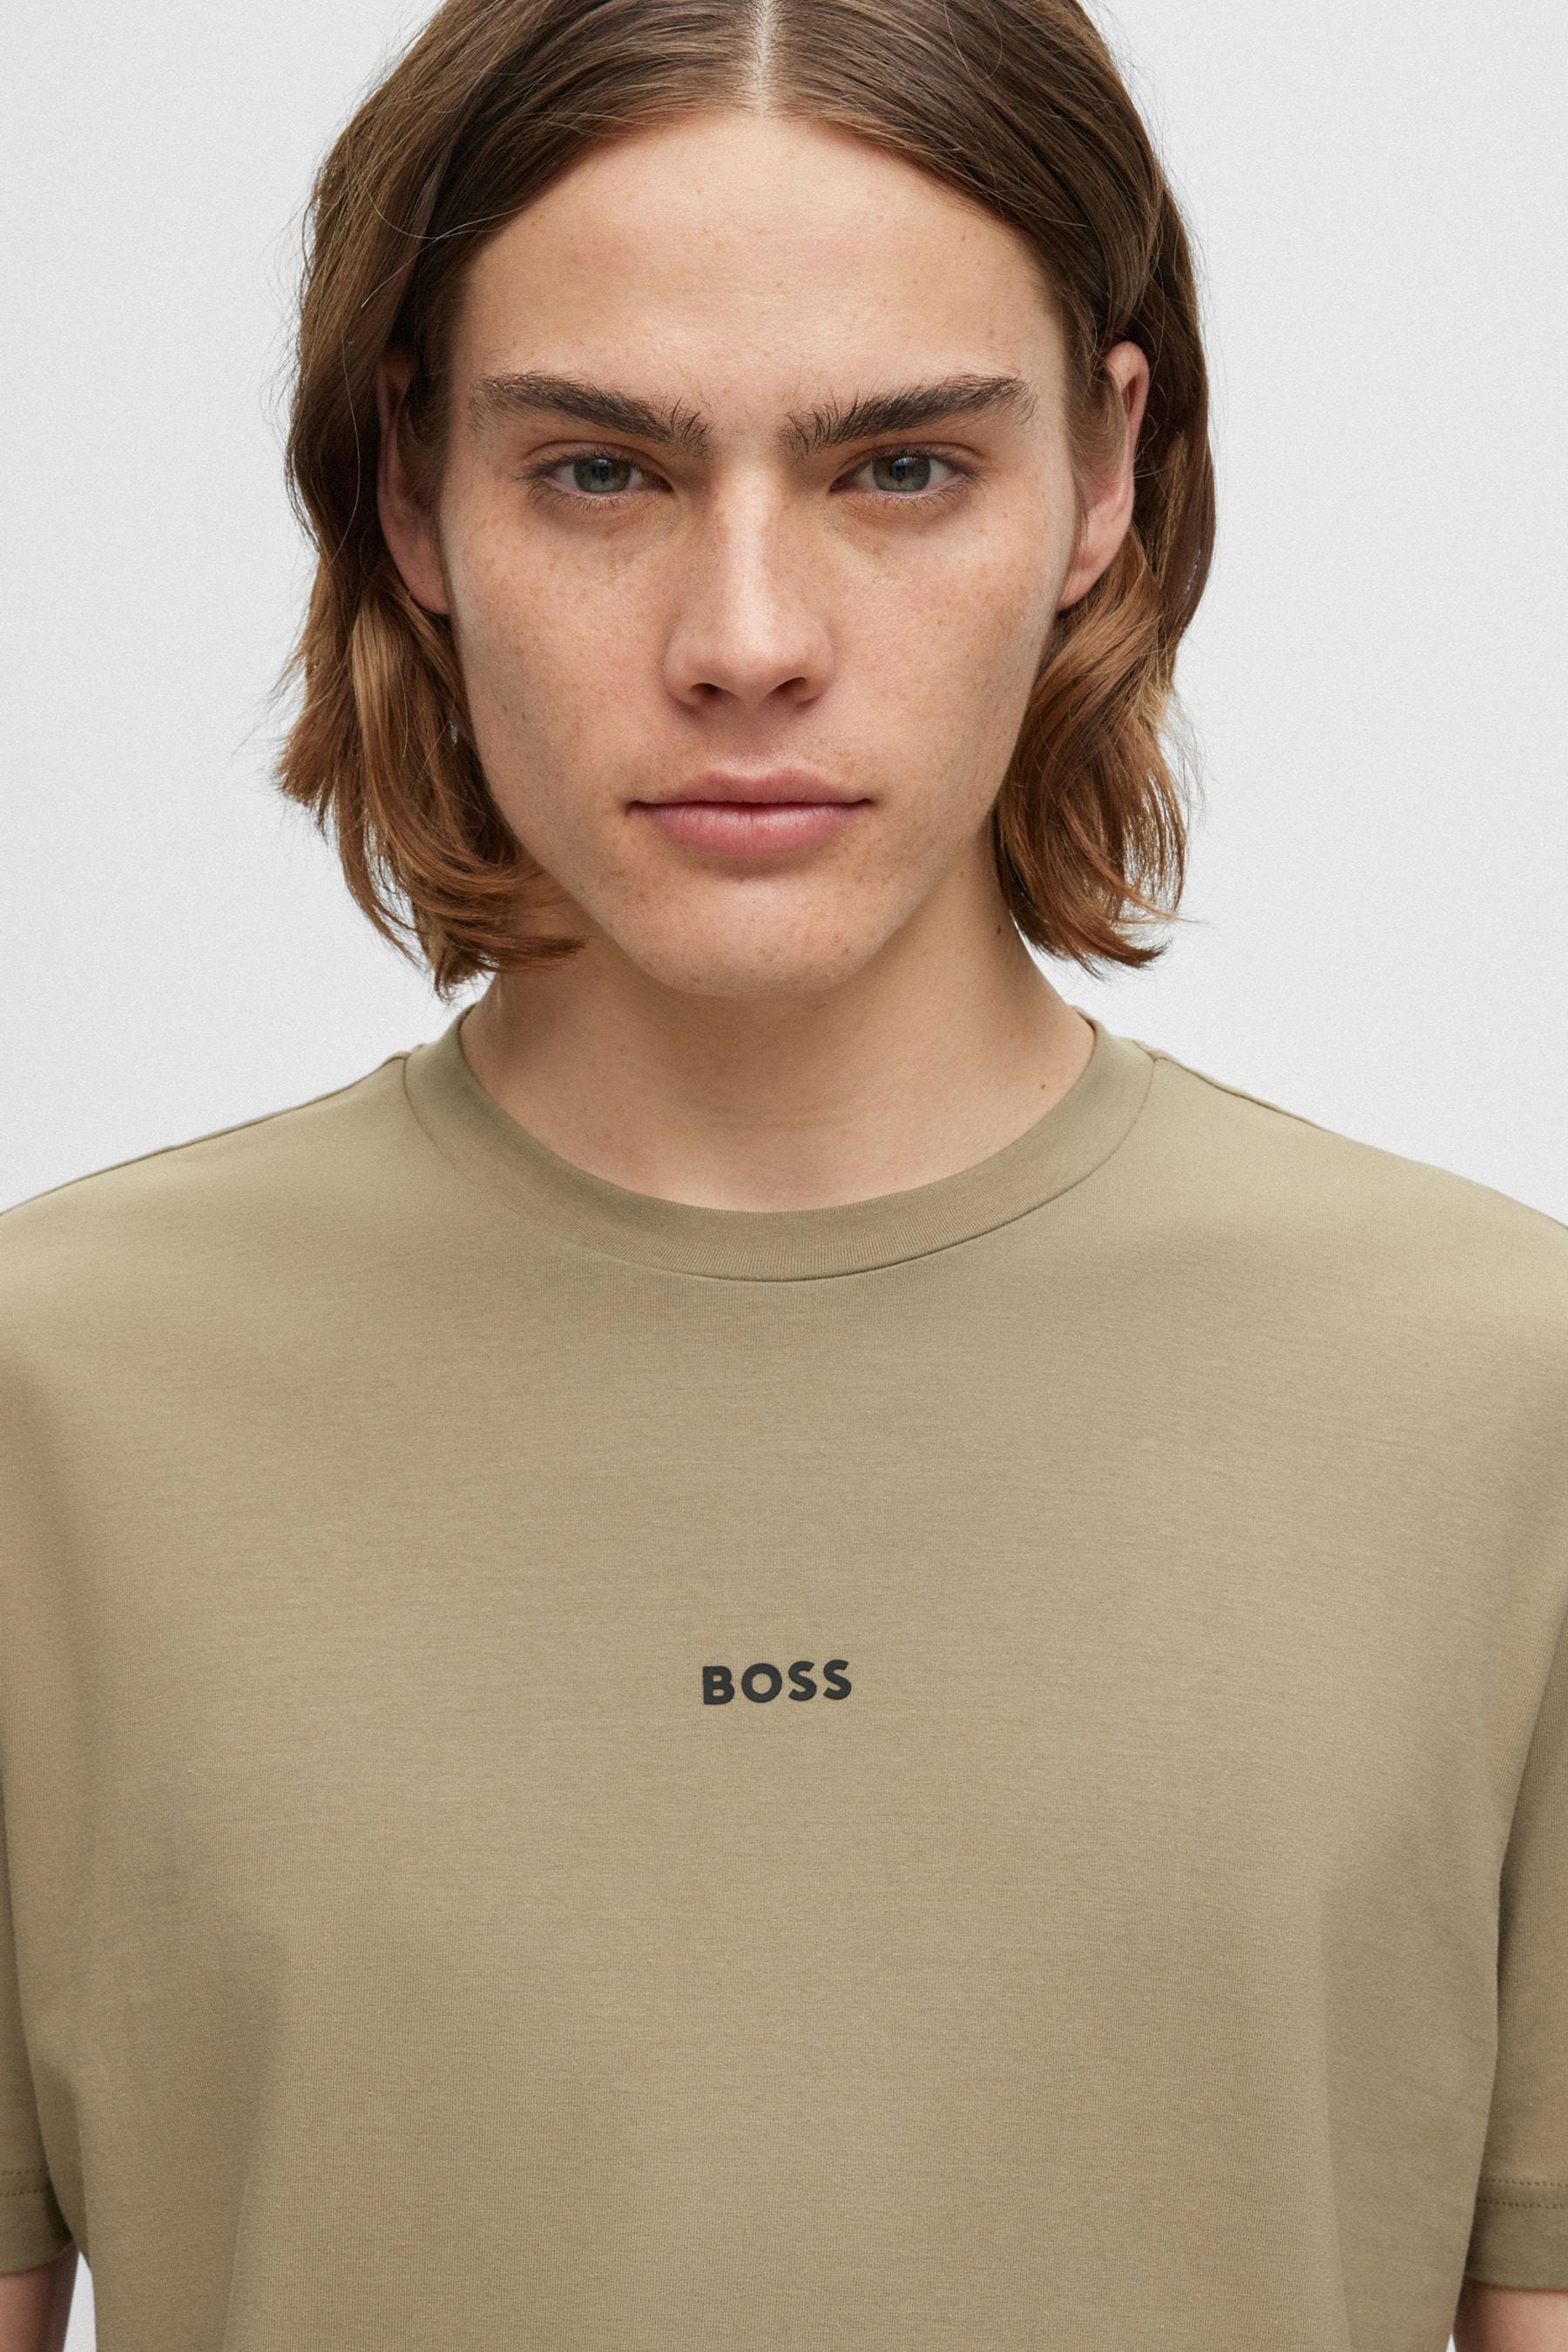 Buy BOSS Beige T Chup T-Shirt from the Next UK online shop